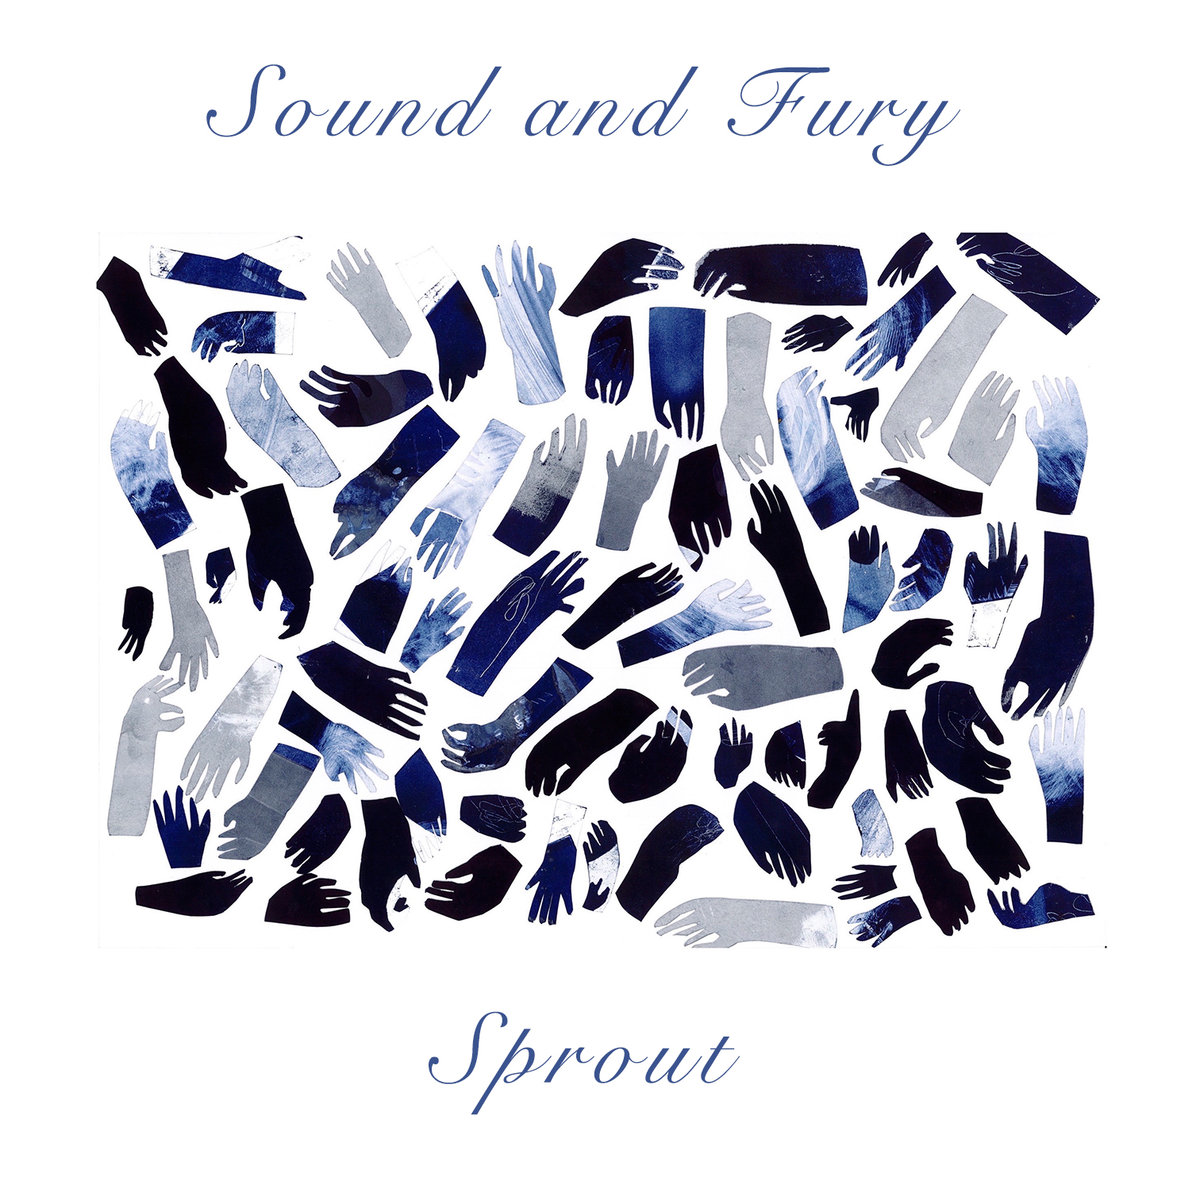 201802/Sound-and-Fury-Sprout.jpg